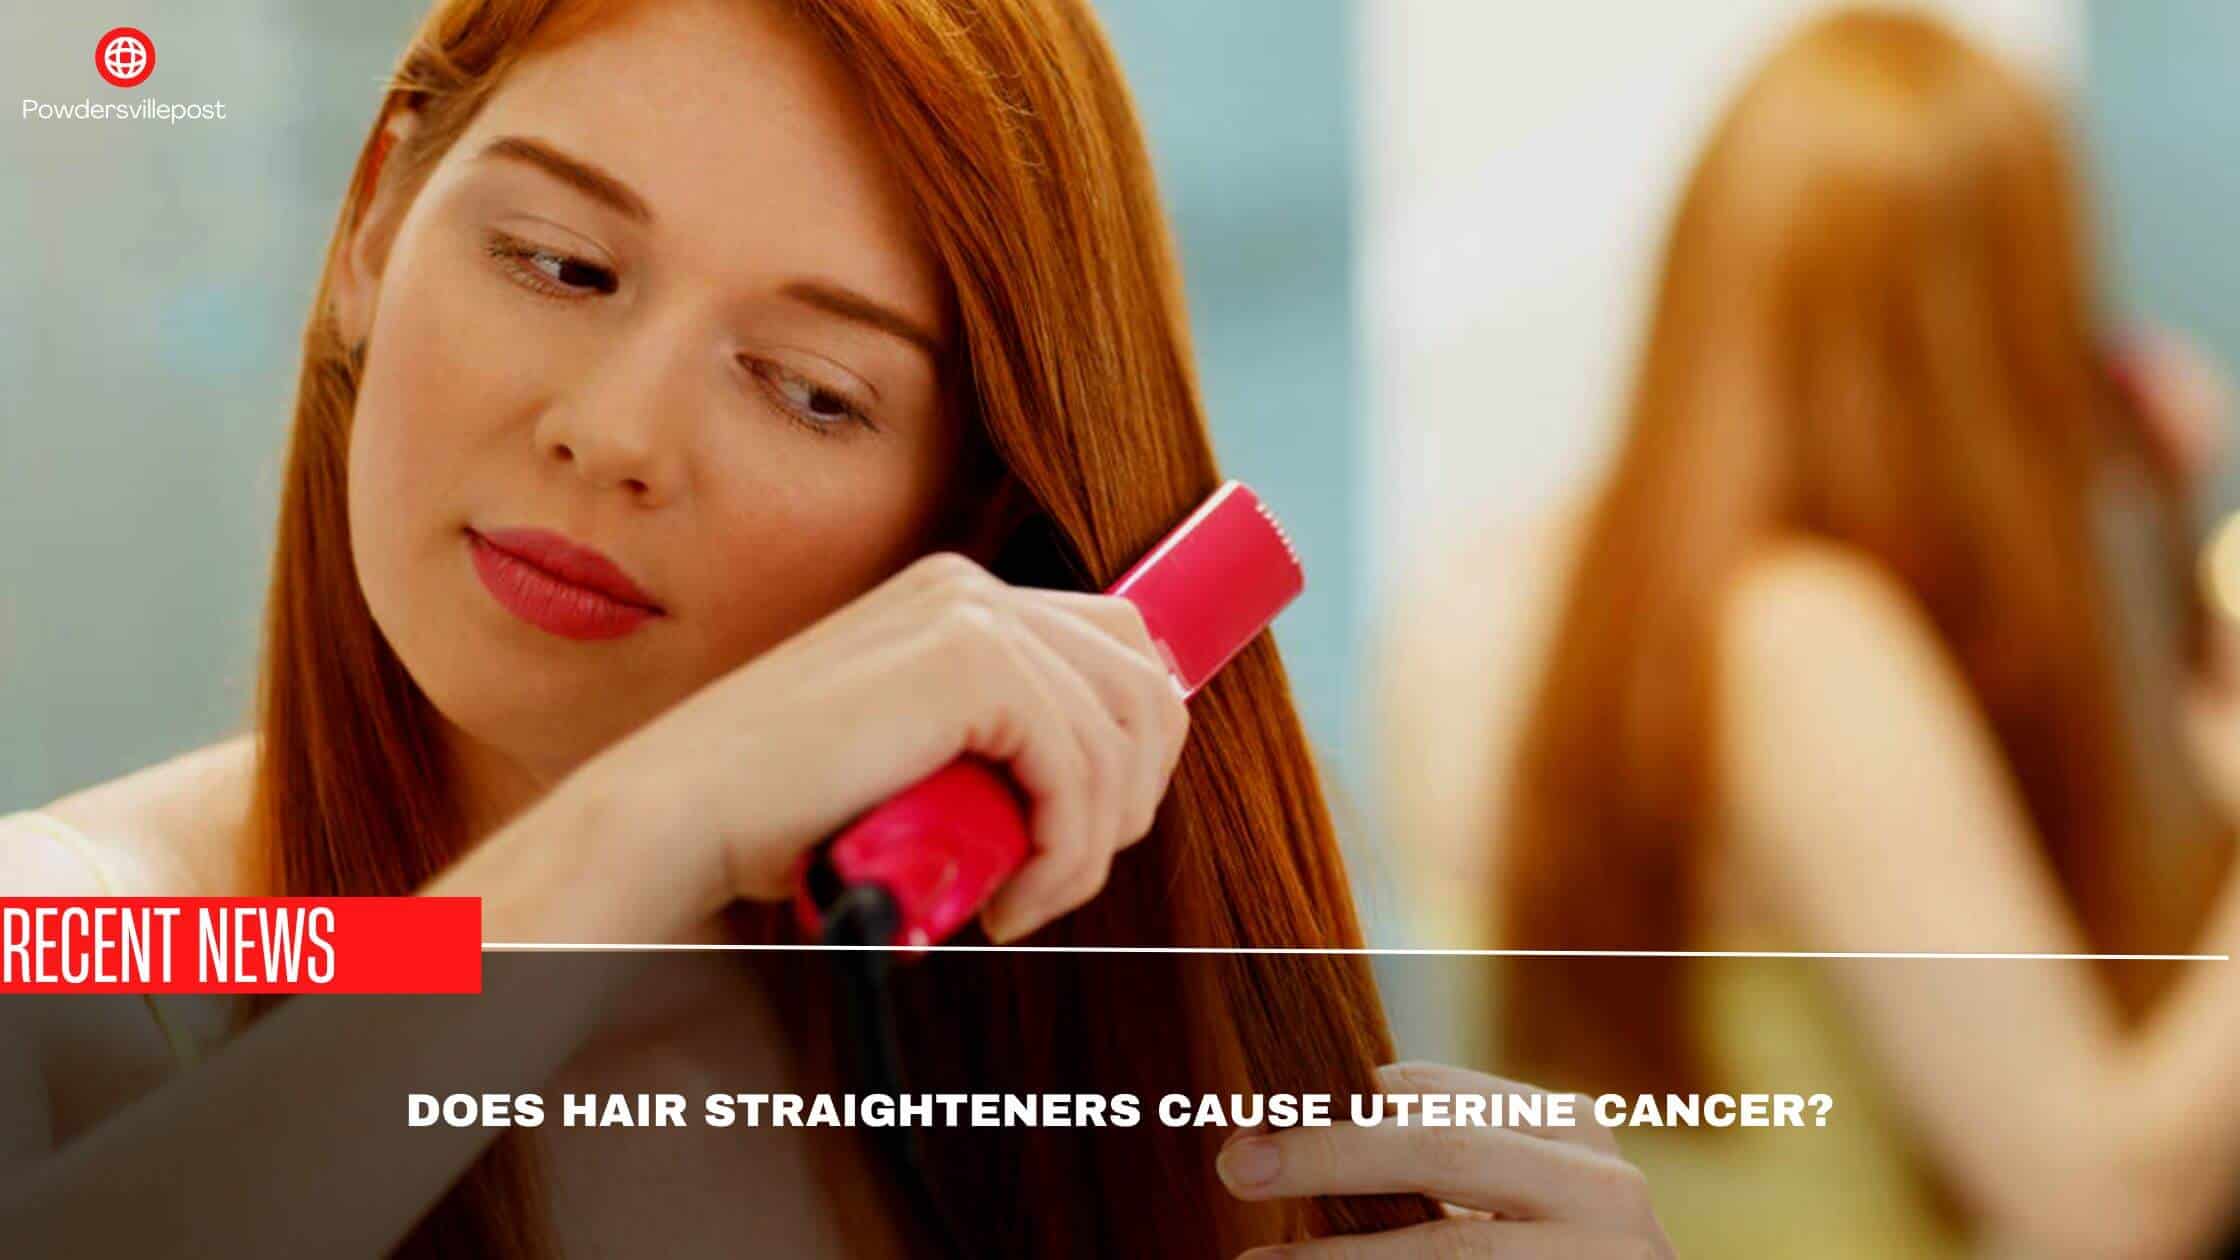 Does Hair Straighteners Cause Uterine Cancer What Study Says